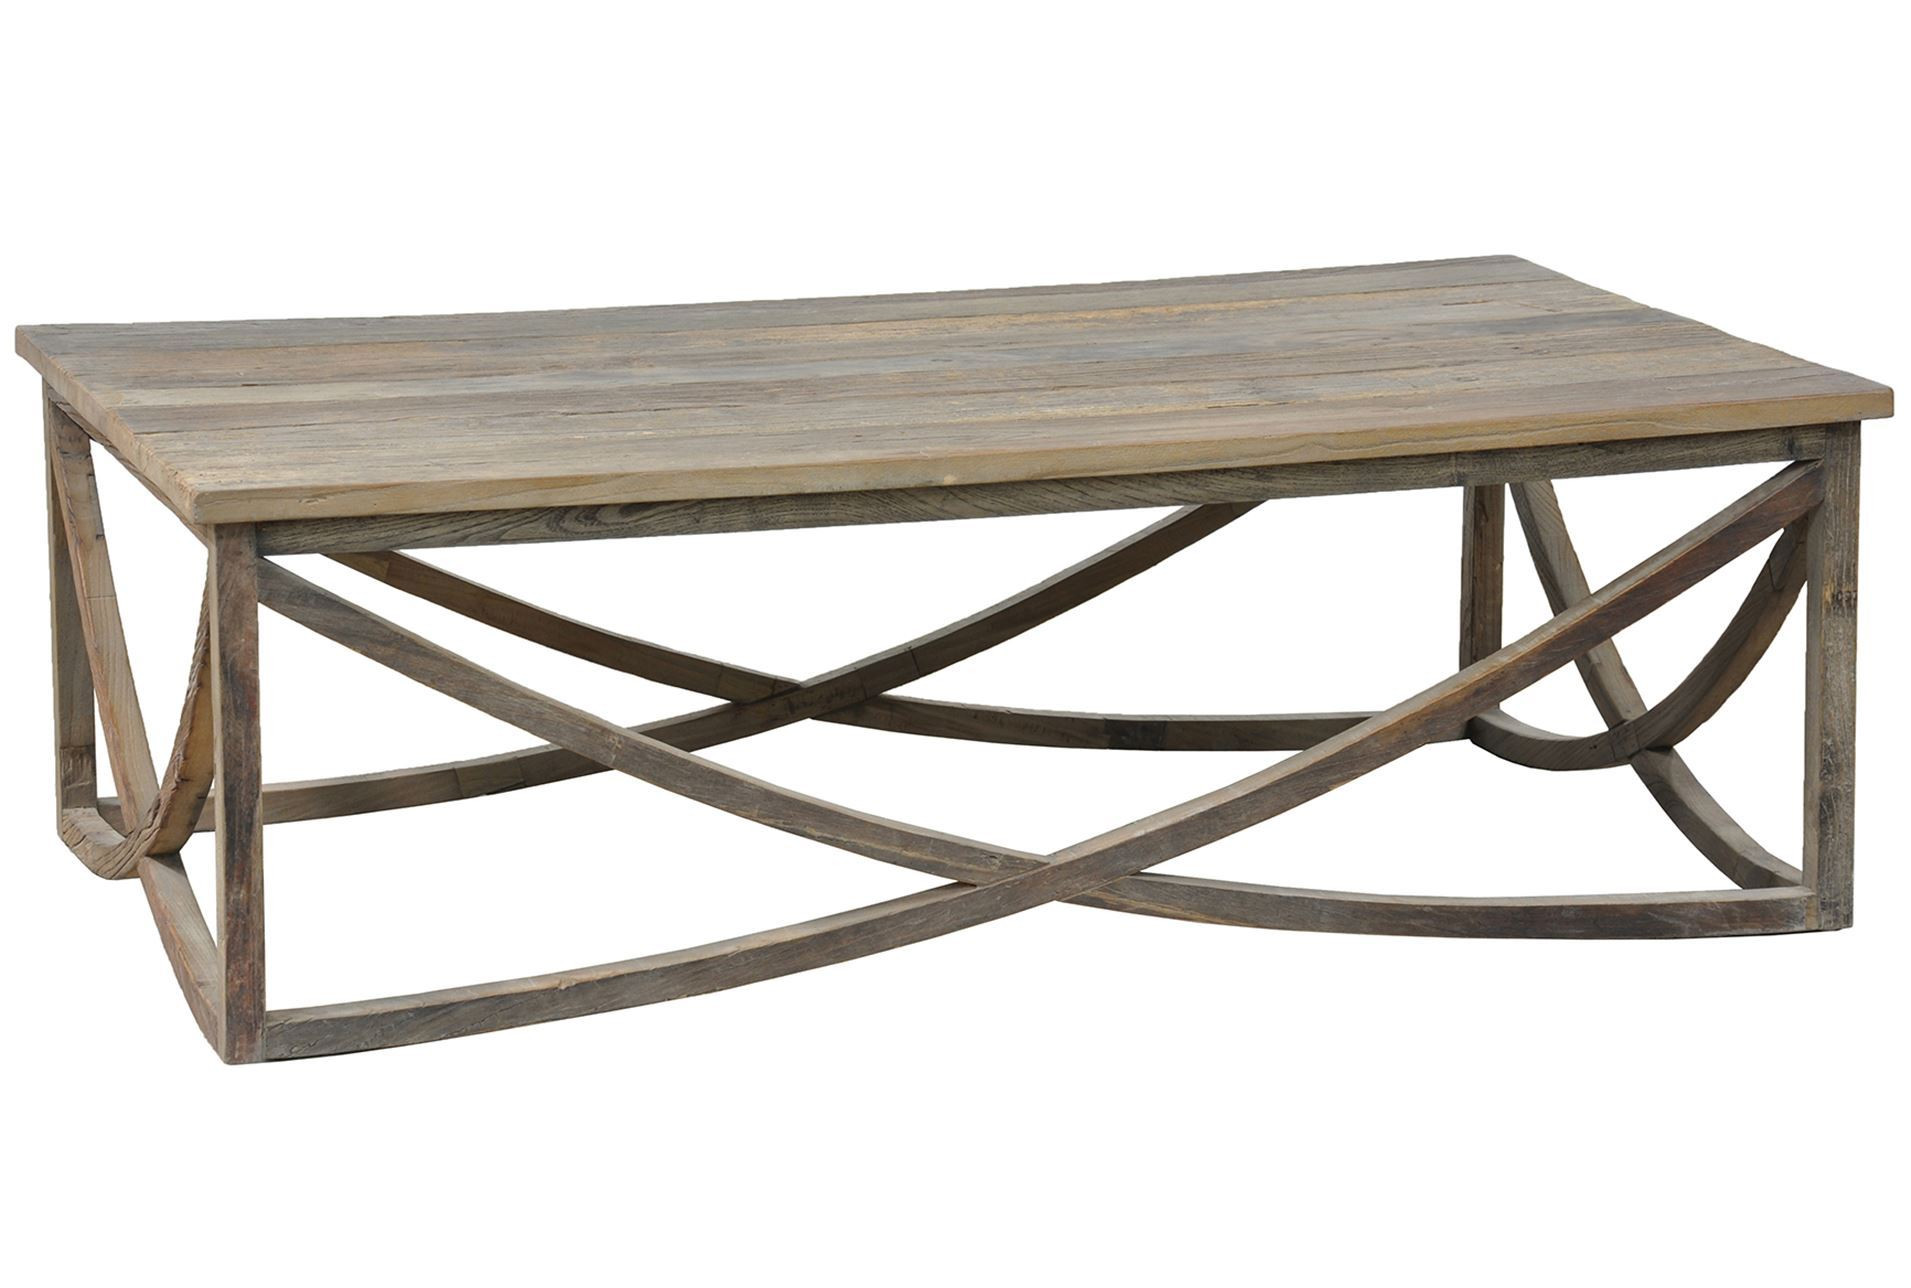 Living Spaces Coffee Table
 Otb Claudia Coffee Table Living Spaces